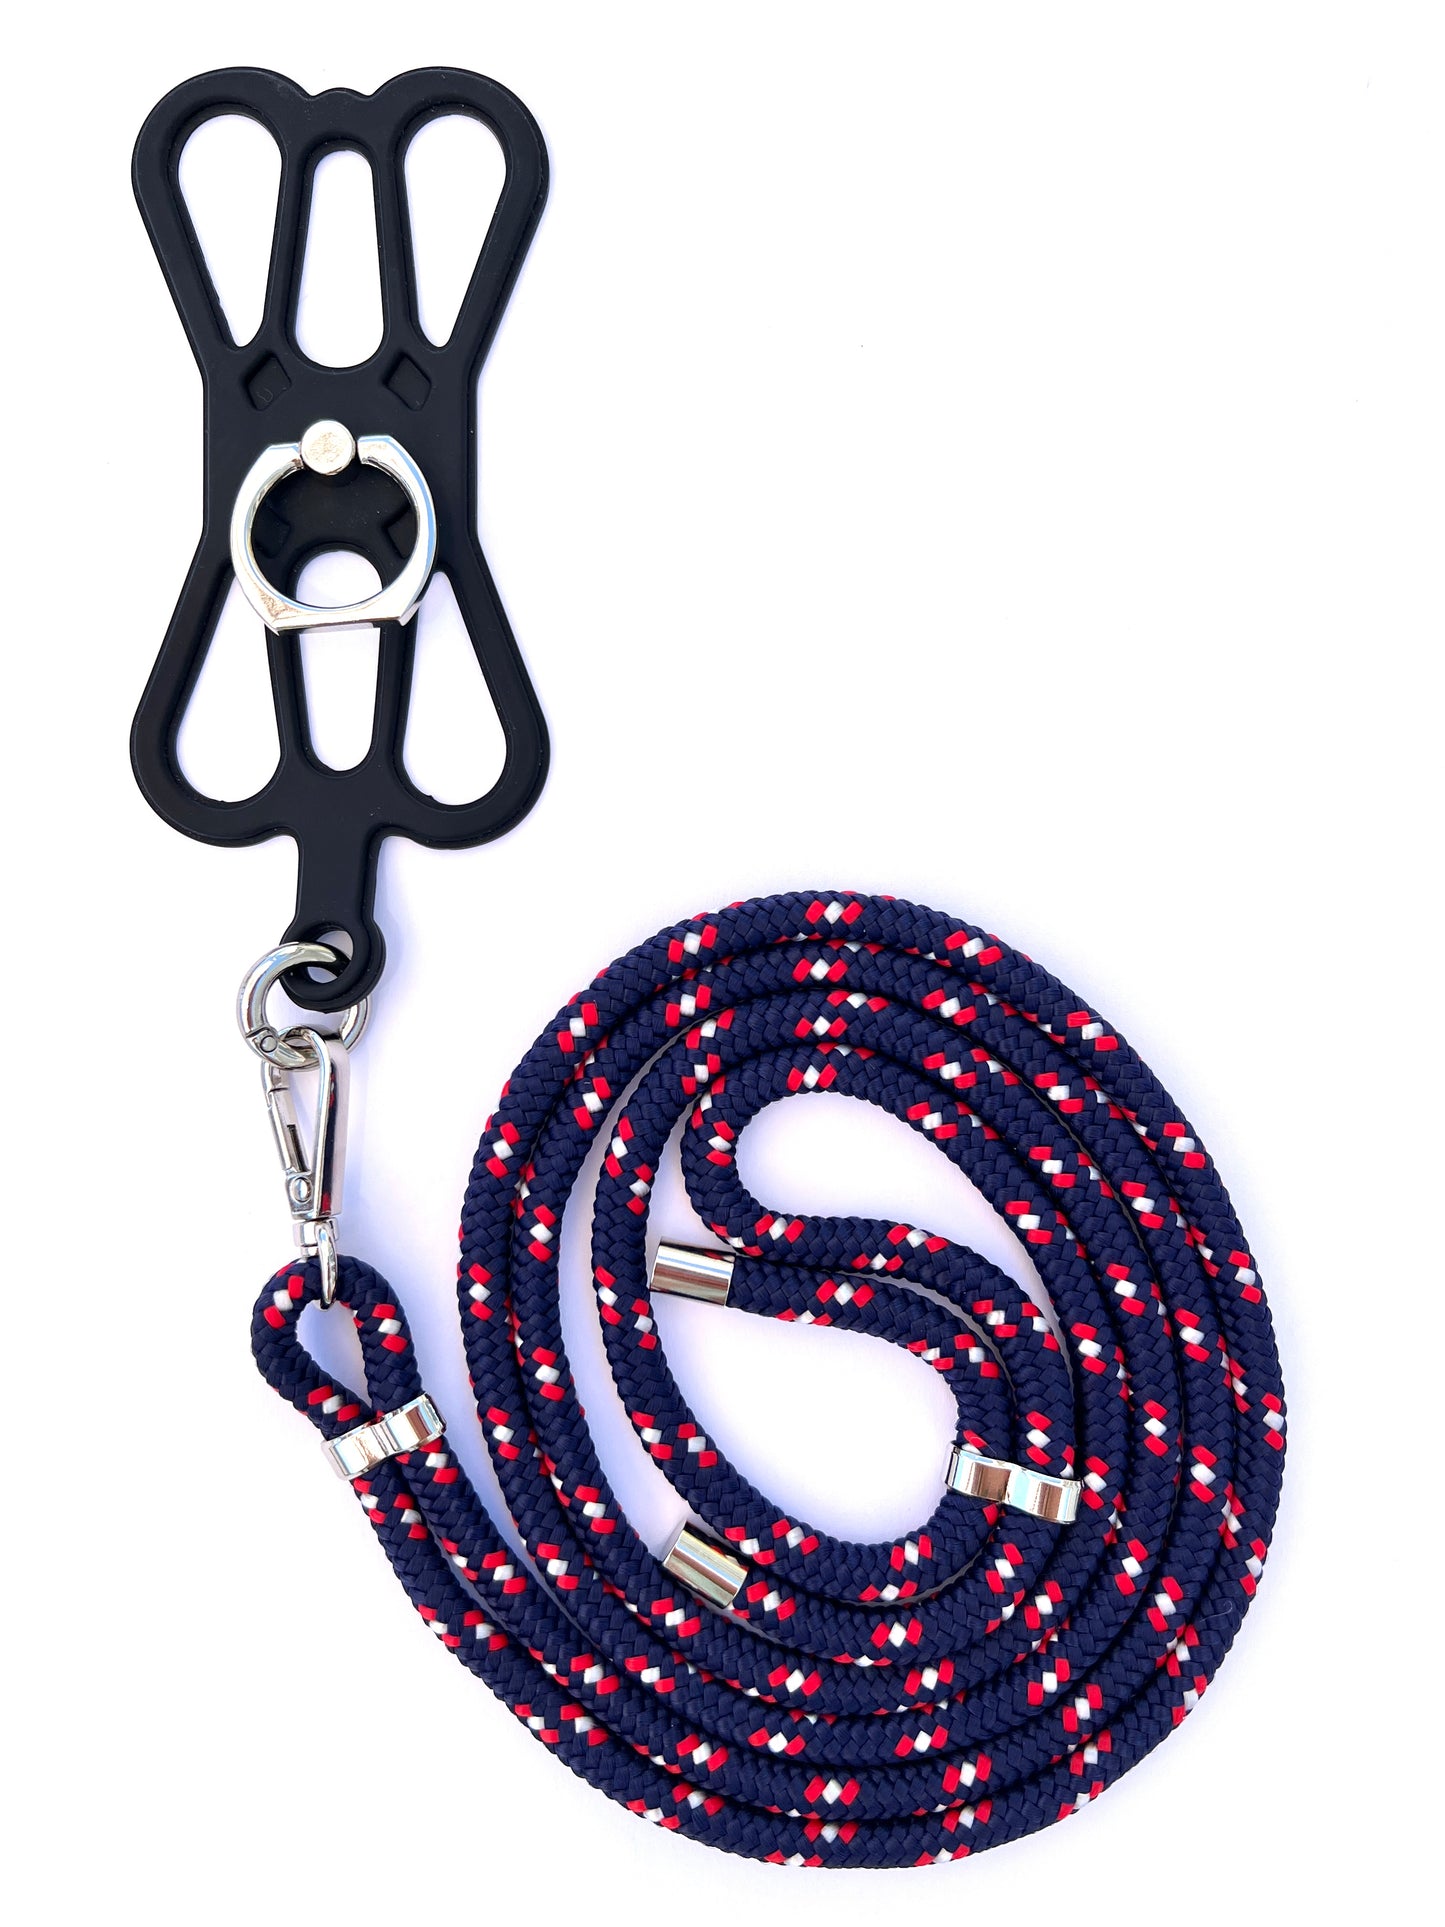 Silicon Holder Phone Strap - Blue/Red/White